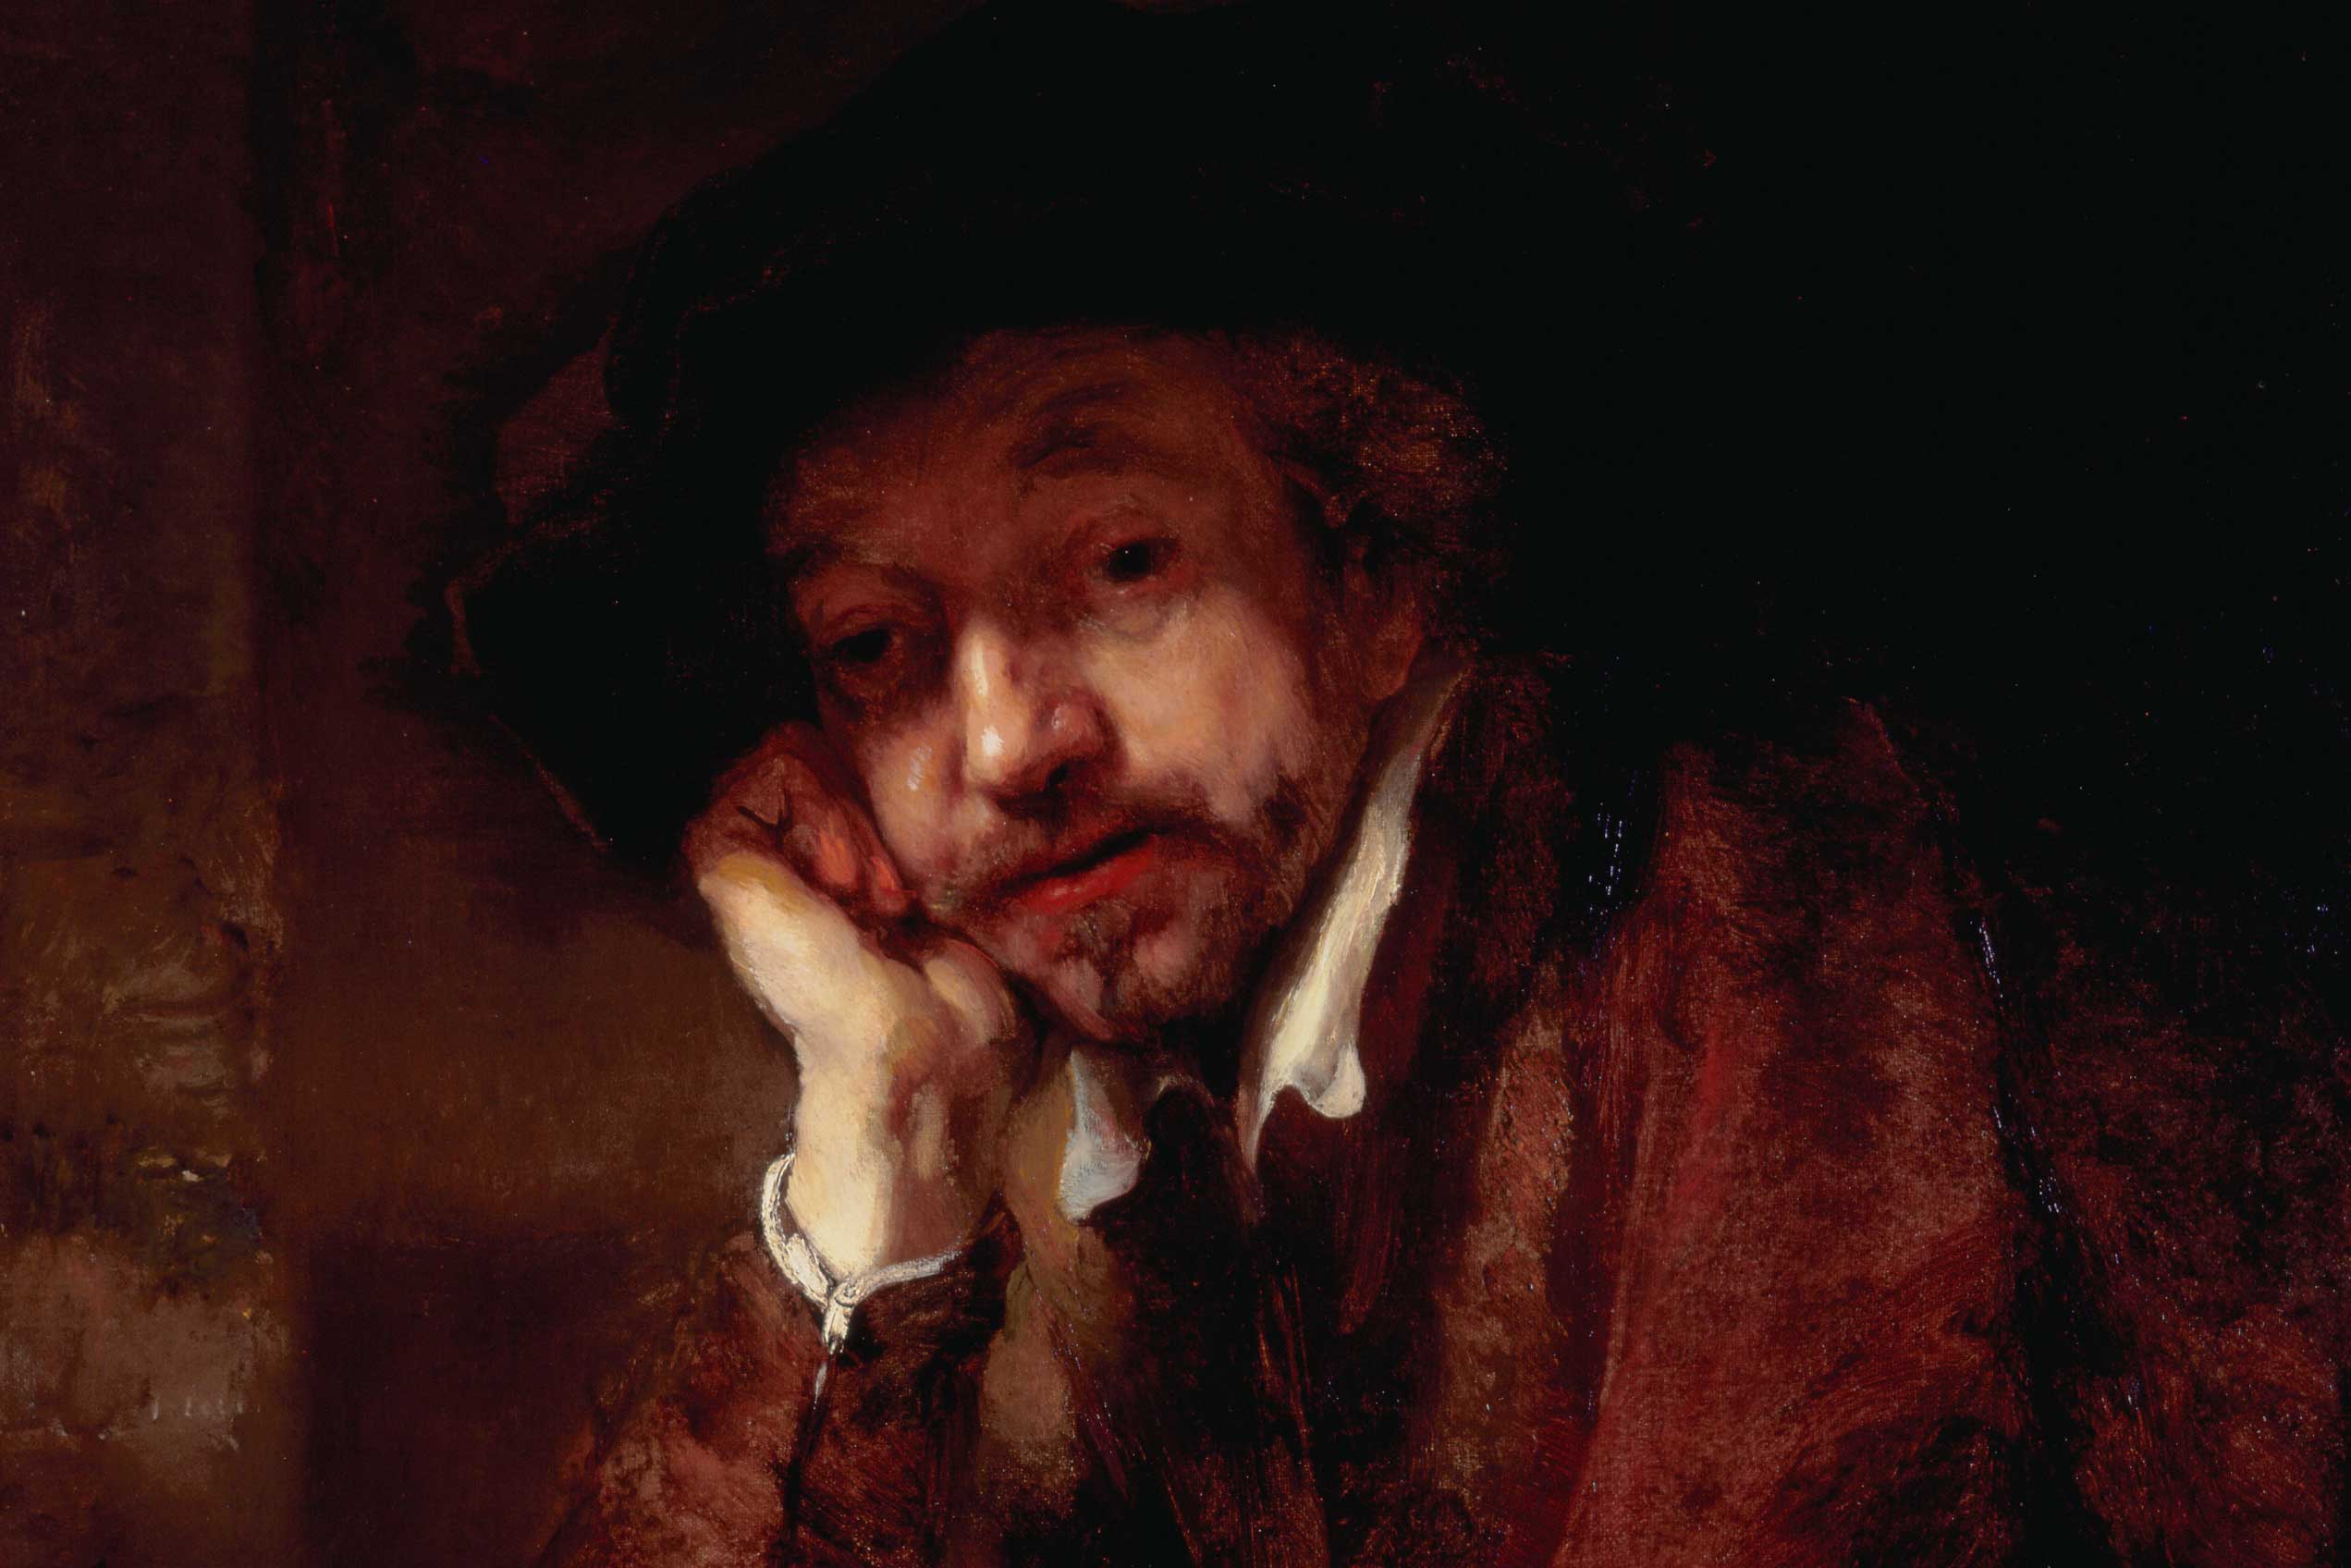 Imitator of Rembrandt van Rijn (Dutch, 1606–1669), Man Leaning on a Windowsill, probably early 1700s, oil on canvas. Taft Museum of Art, Bequest of Louise Taft Semple, 1962.1